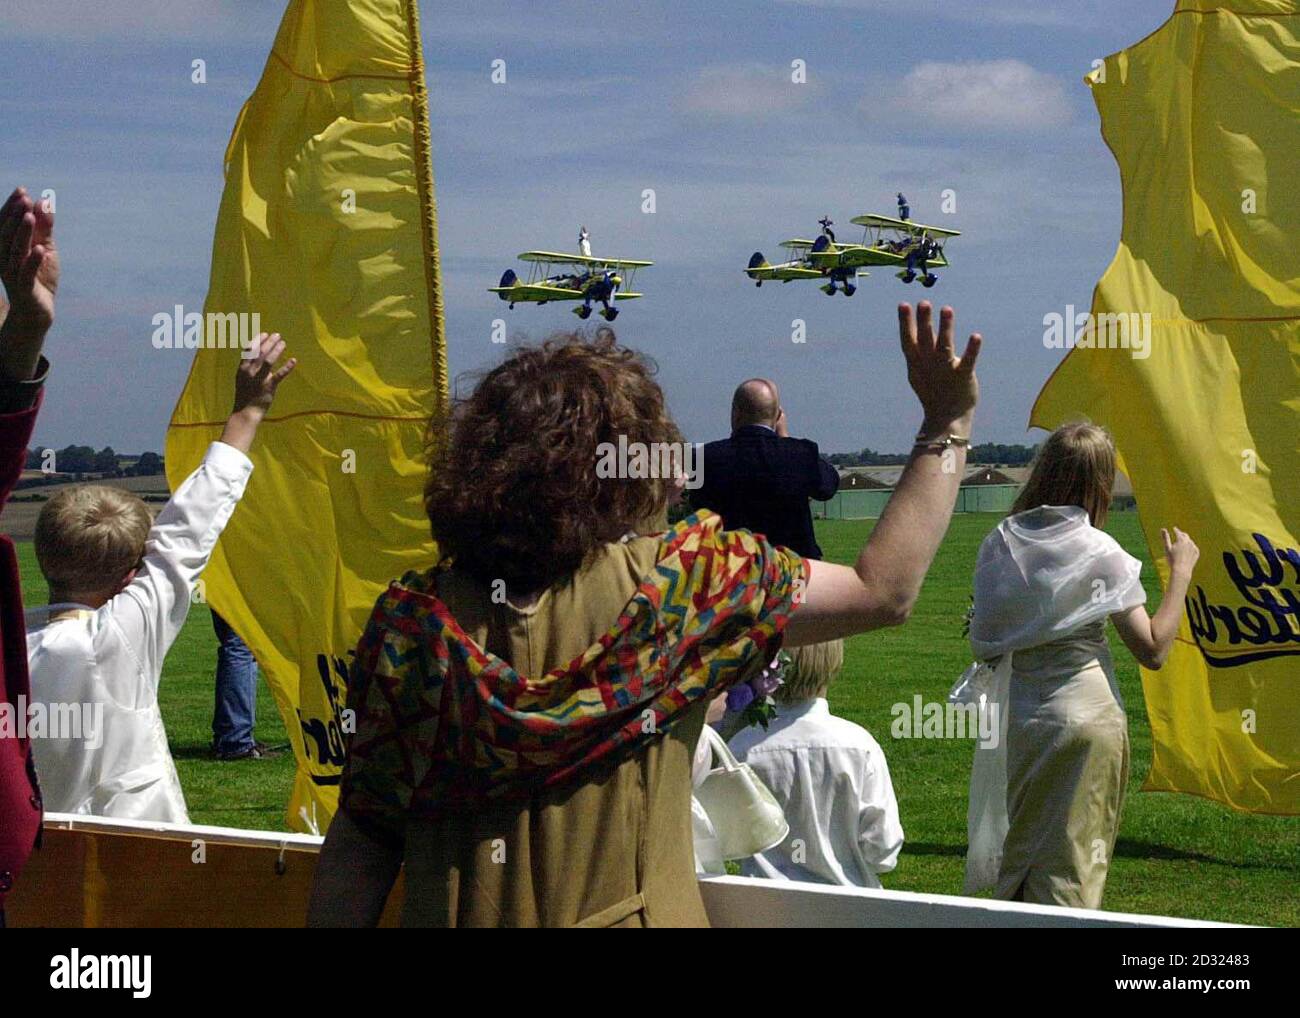 Family and friends wave at high-flying couple Caroline Hackwood (left plane) and Justin Bunn during their airborne wedding ceremony strapped to the wings of 1940s biplanes, with clergyman the Rev George Brigham on the front plane at Rendcomb airfield. * near Cirencester, Gloucestershire. Their their vows were relayed by microphones to their wedding party on the ground. Water board worker Caroline, 27, who was wearing a cream brocade and satin dress, screamed 'I do' as Mr Brigham shouted out the vows over loud speakers. The couple's 75 wedding guests on the ground clapped and cheered as the Stock Photo